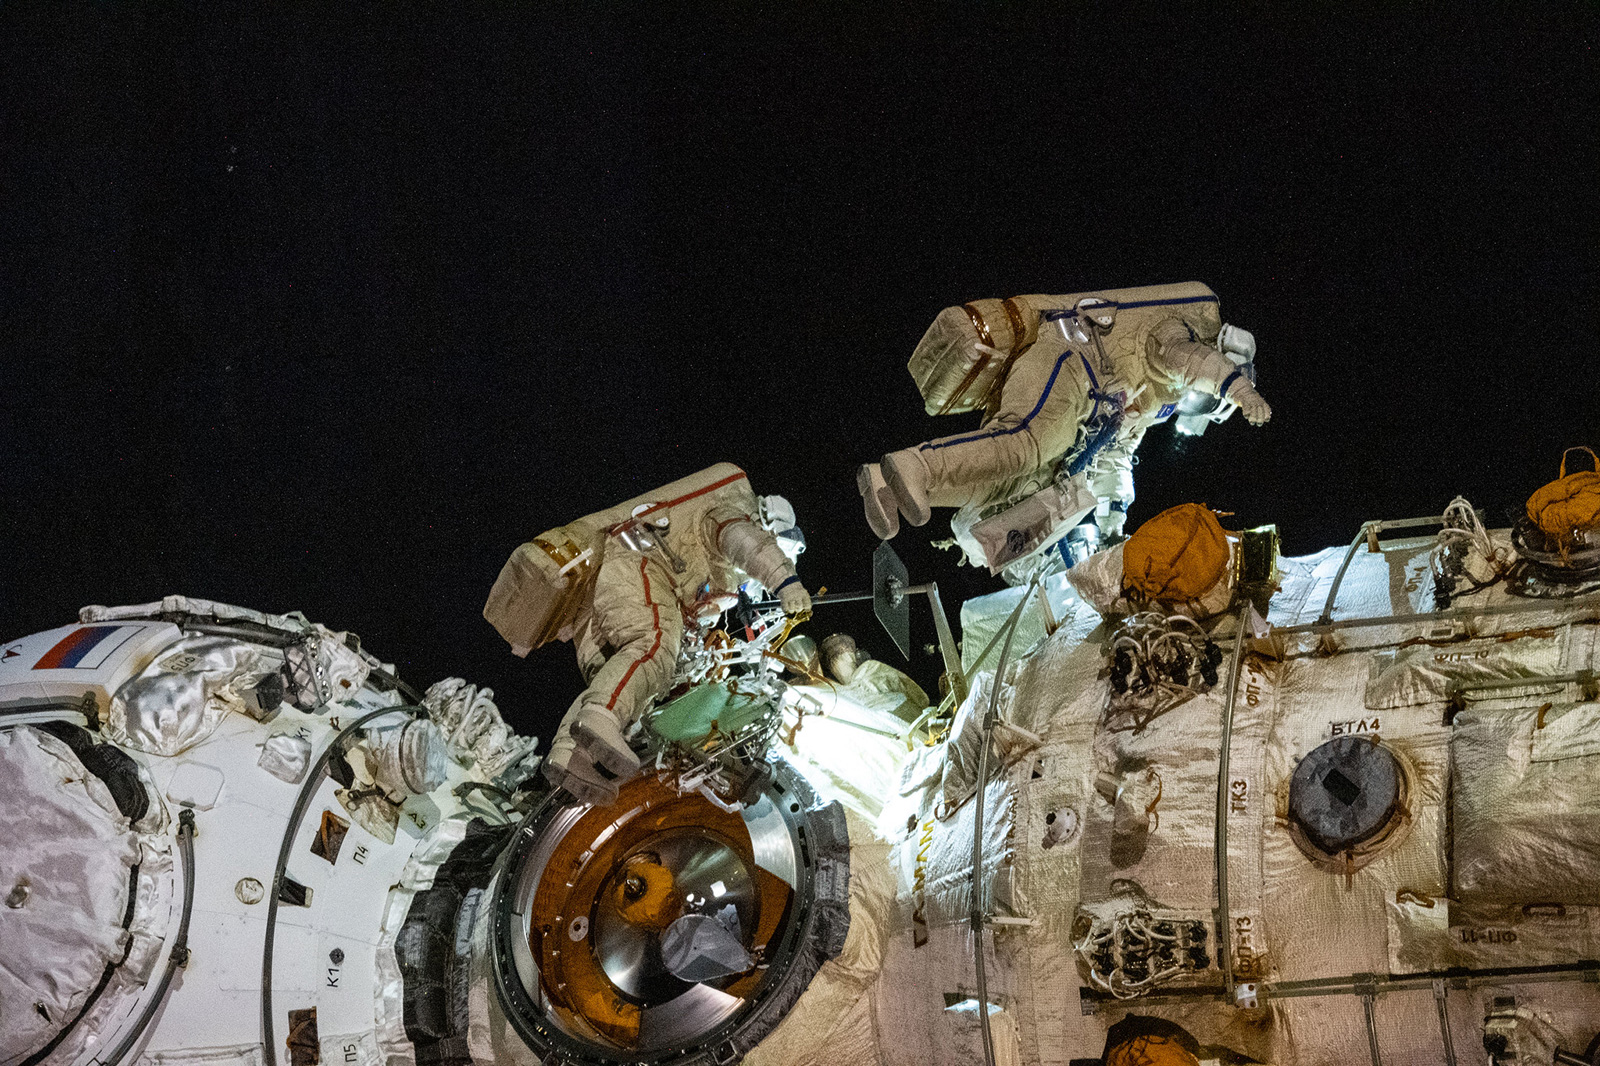 Russian Cosmonauts On Spacewalk To Activate Space Station’s New Robotic Arm